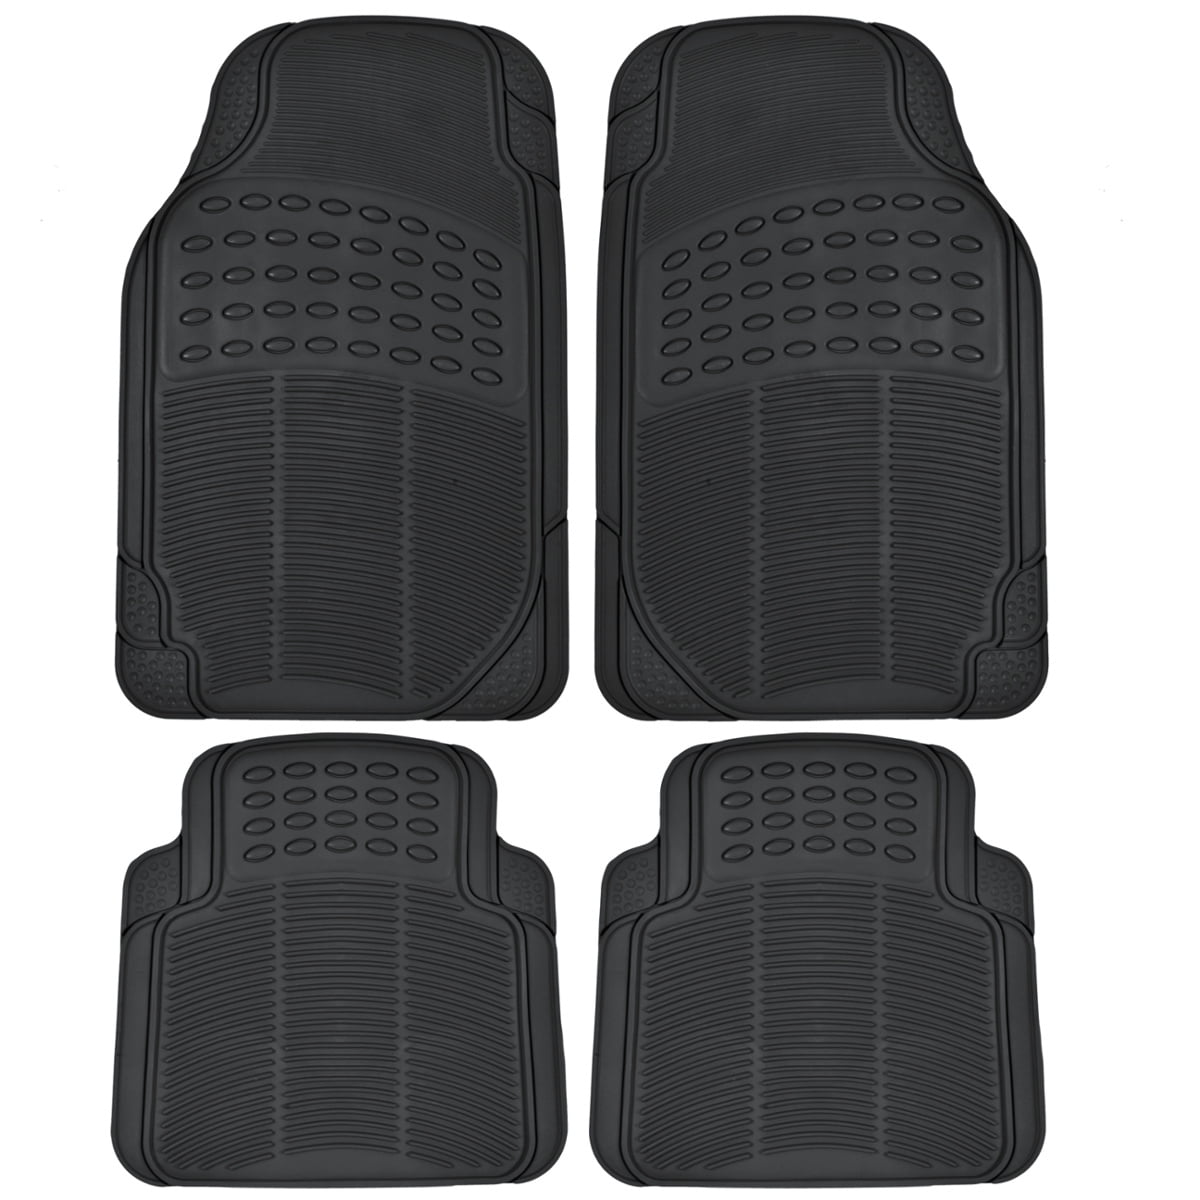 Heavy Duty Protection 4 Pieces Set Front & Rear Grey Trimmable BDK All Weather Rubber Floor Mats for Car SUV & Truck 